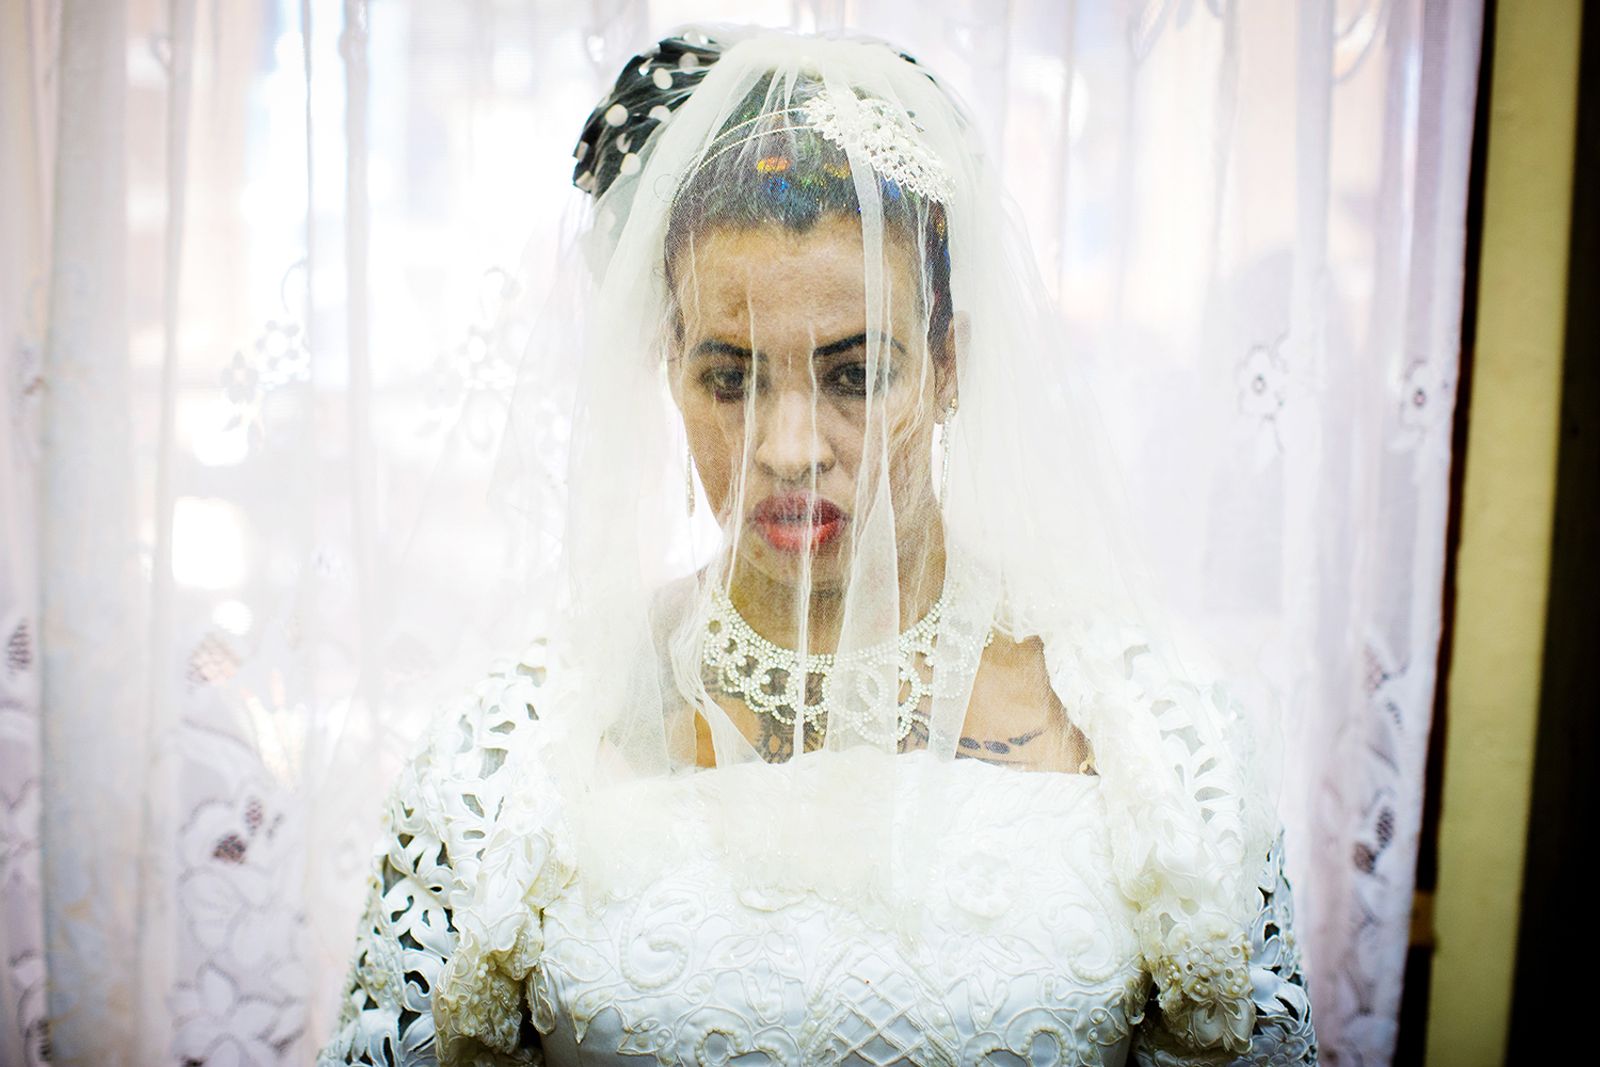 © Anne Ackermann - Image from the Behind Veils and Walls - Women in Little Mogadishu photography project